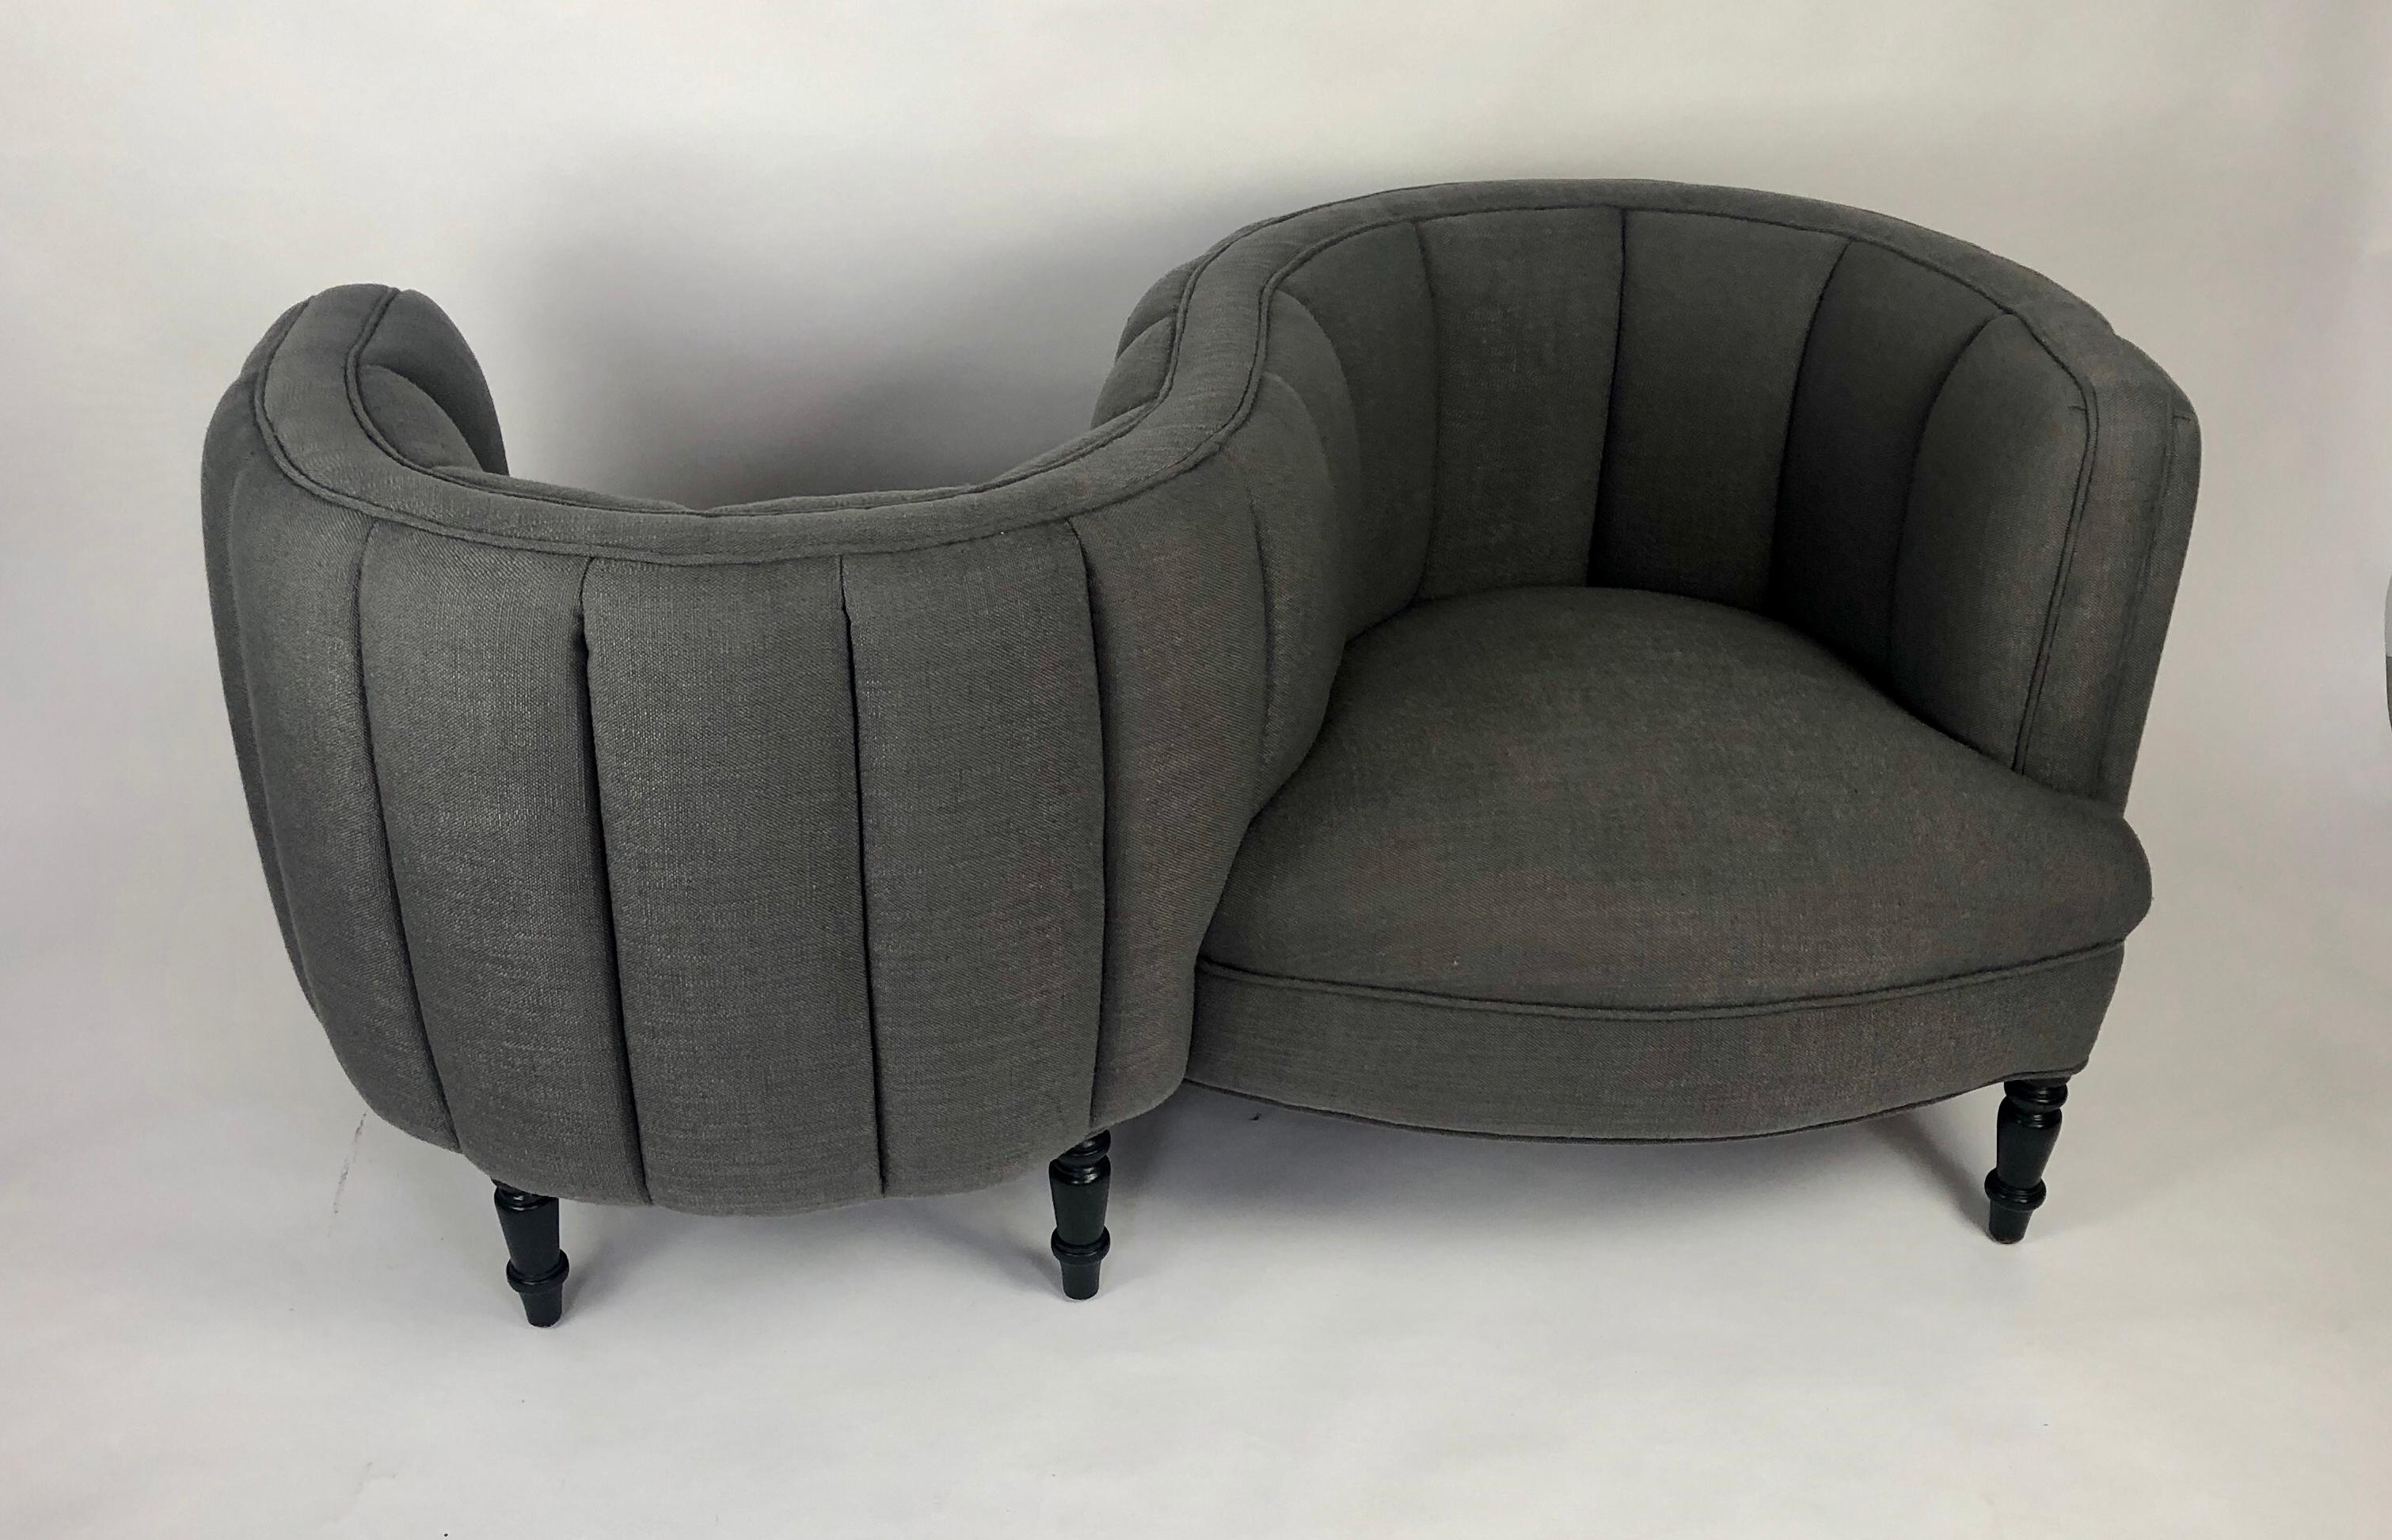 This Classic Napoleon III style armchair or tête-à-tête has been restyled. It is the
perfect conversation piece. This version has turned wooden legs with the traditional Napoleon III design and a more modern style to the upholstery. The settee has